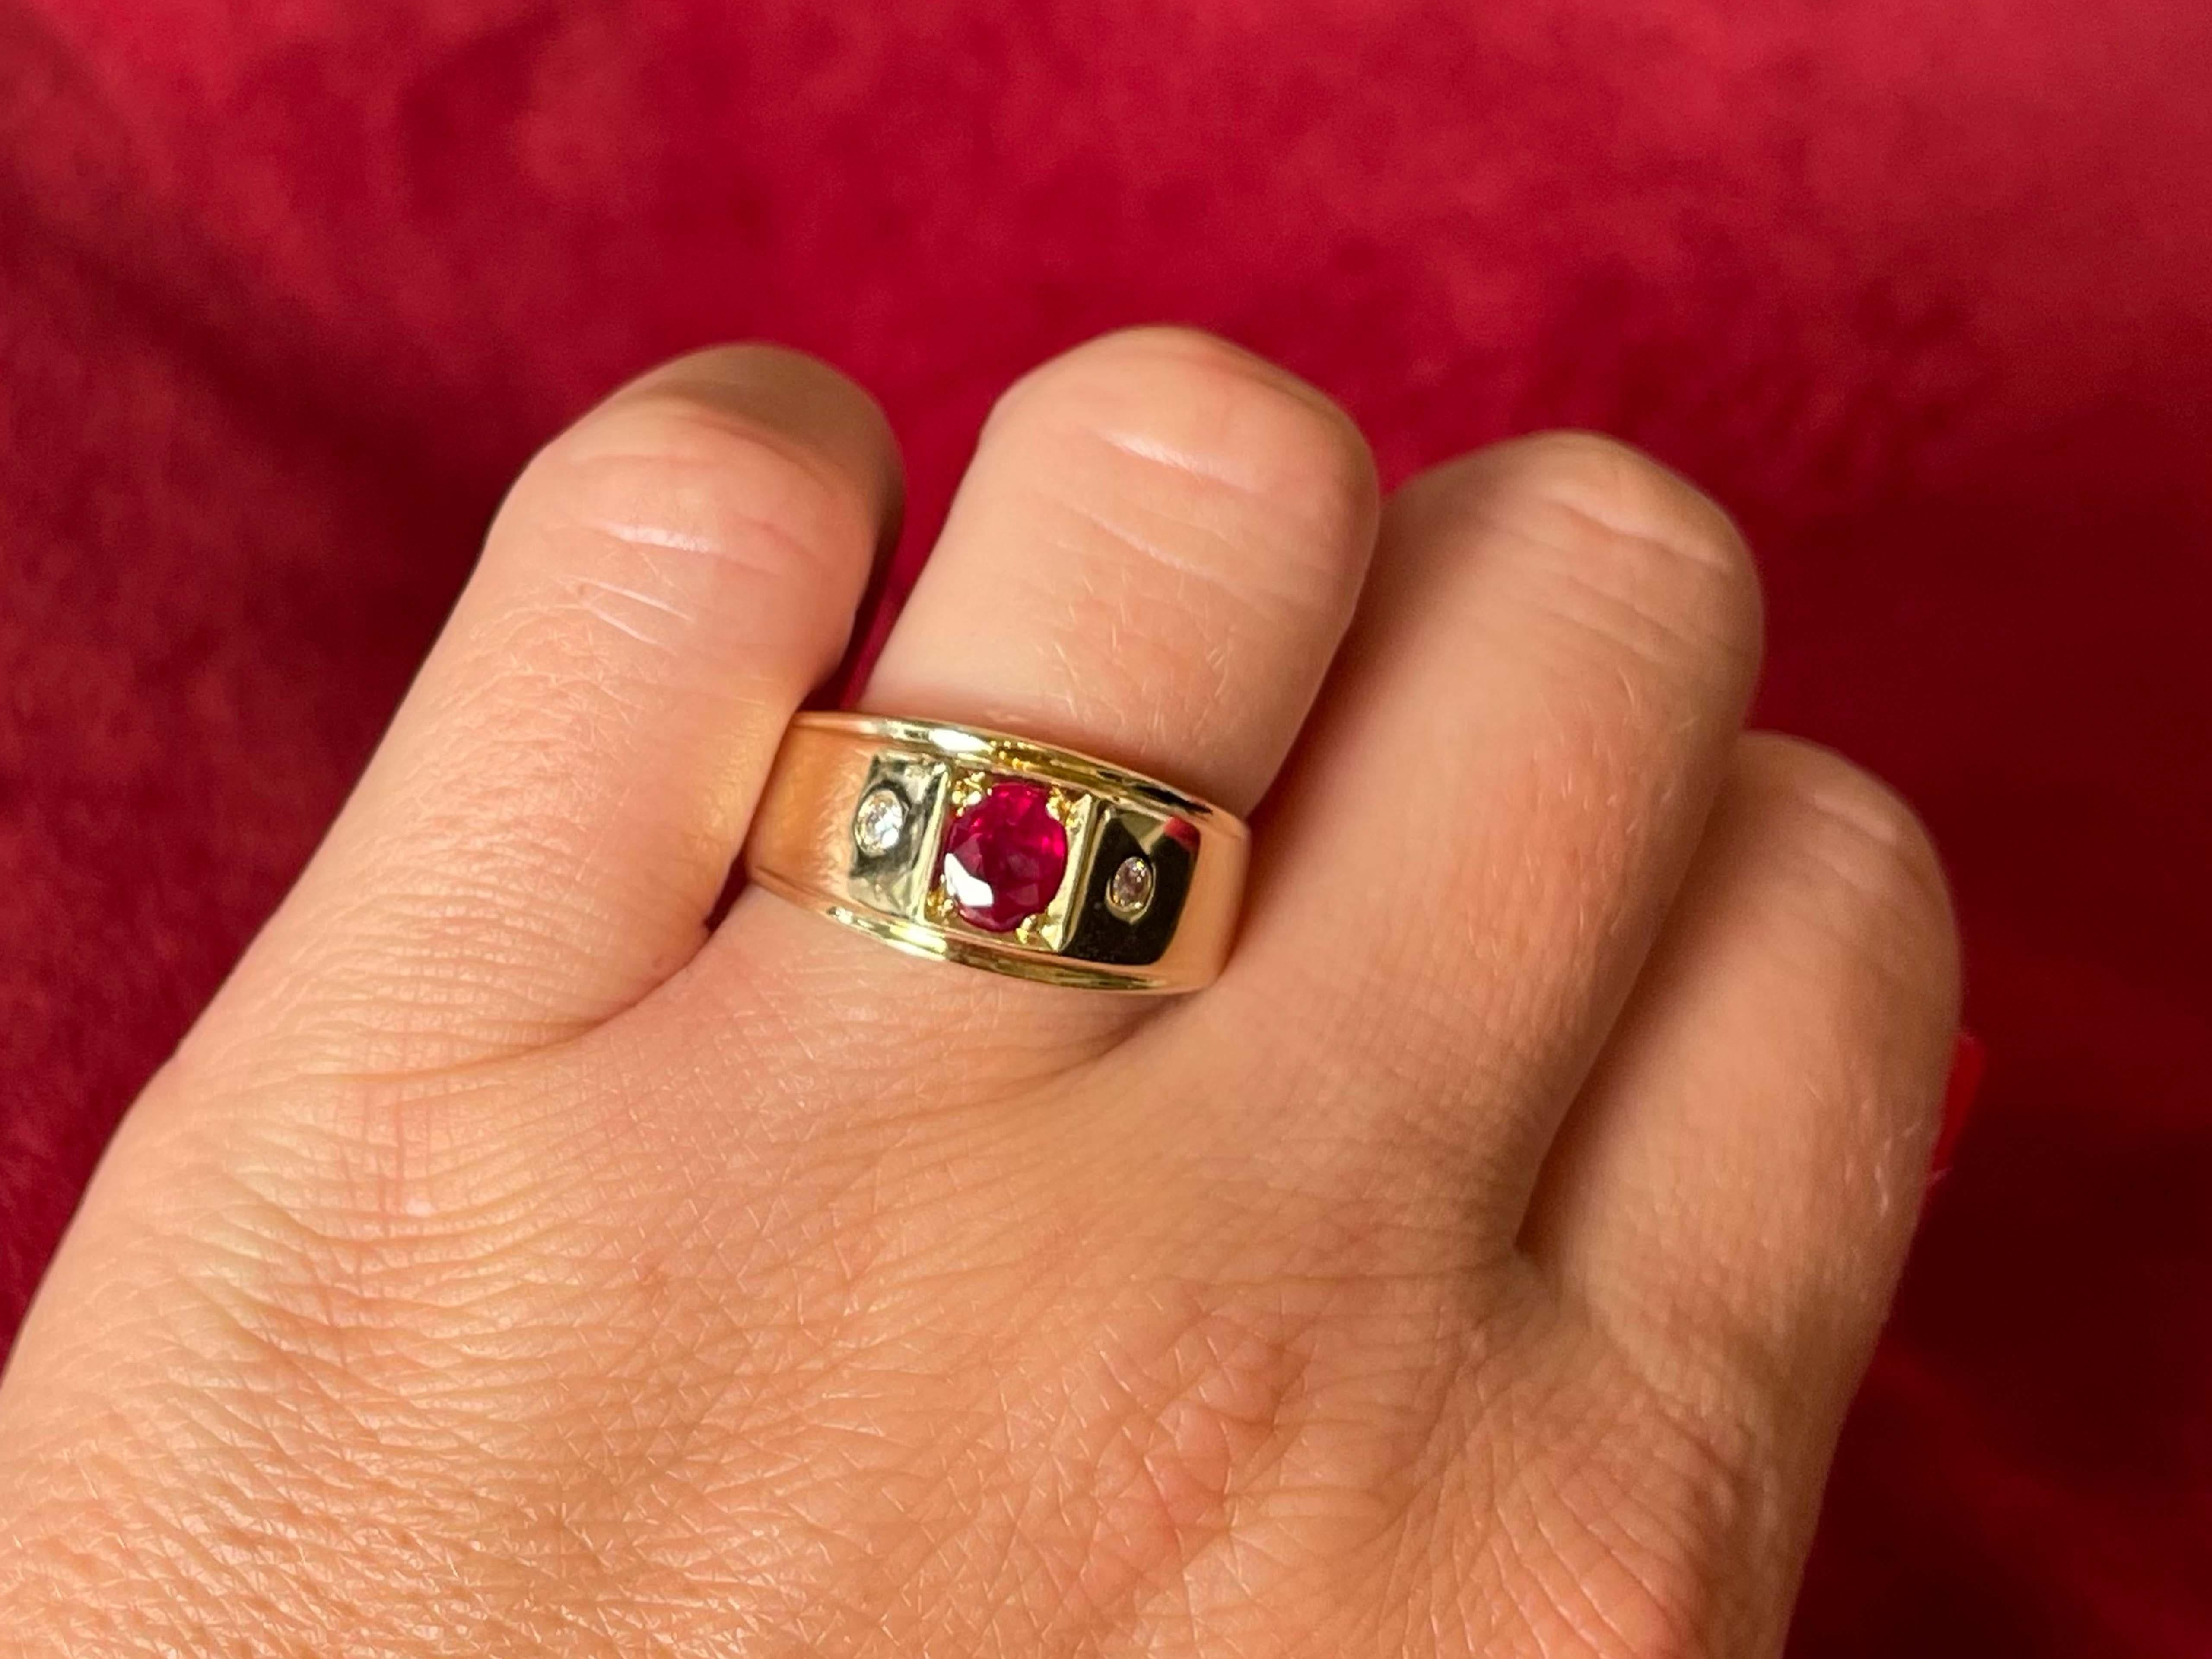 Item Specifications:

Metal: 18K Yellow Gold

Total Weight: 10.0 Grams

Ring Size: 10

Gemstone Specifications:

Gemstones: 1 oval red ruby
​
​Ruby Measurements: ~6.24 mm x 5.06 mm x 3.06 mm 

Ruby Carat Weight: ~0.75 carats

Diamond Carat Weight: